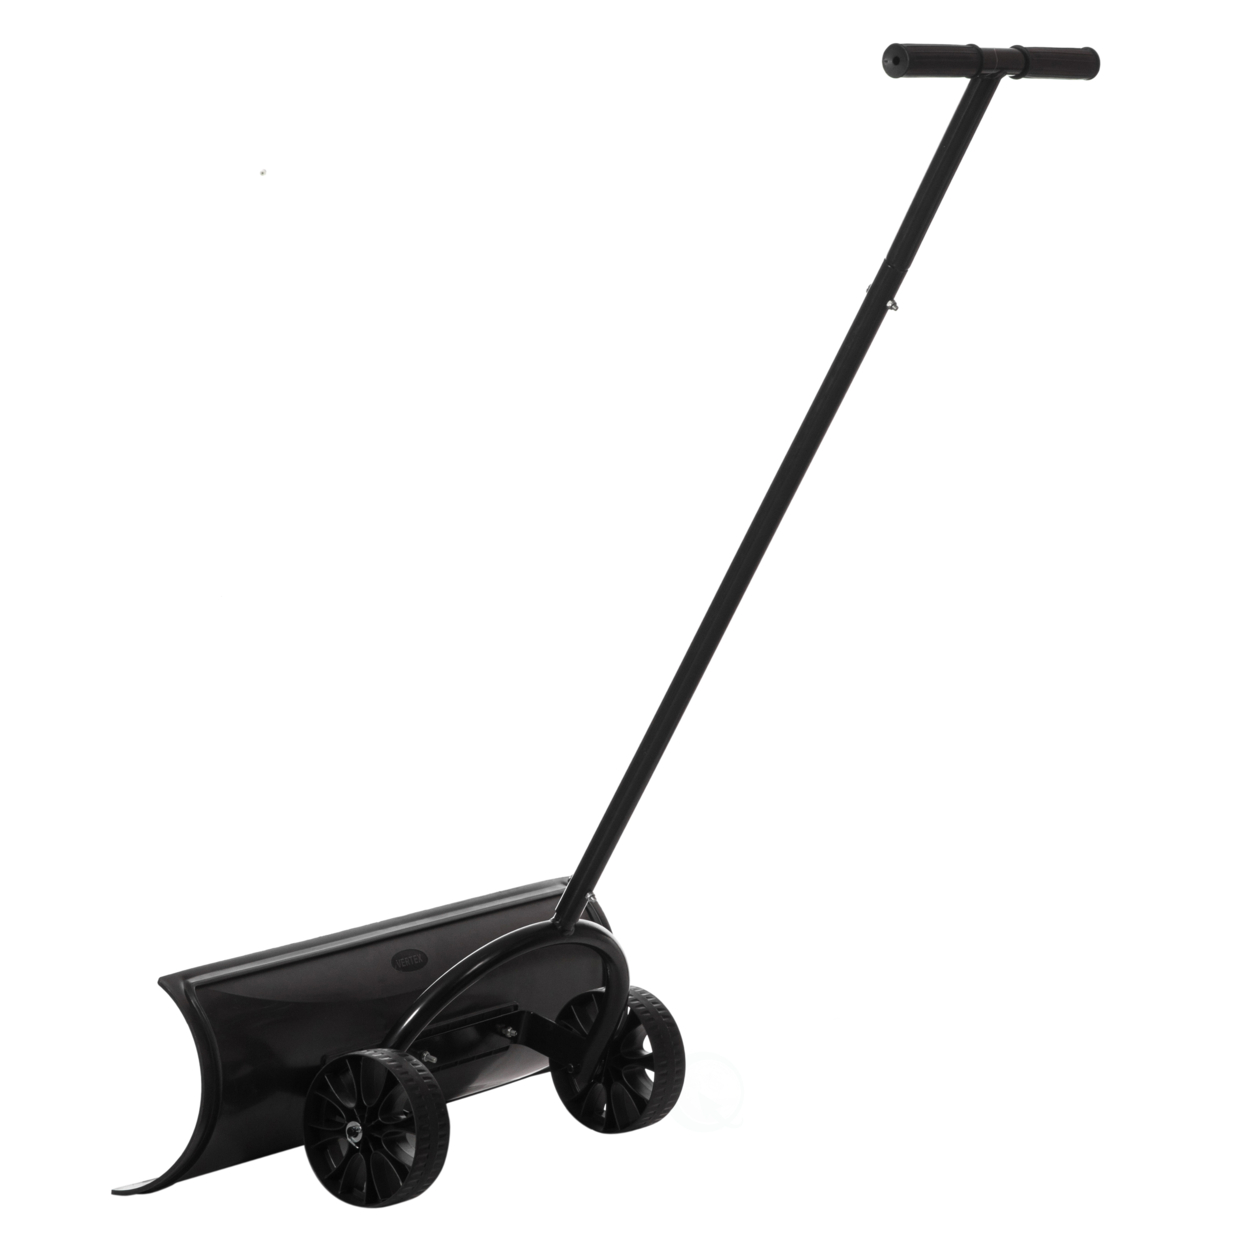 Black Heavy Duty Snow Shovel Rolling Pusher Remover With Wheels And Wide Blades